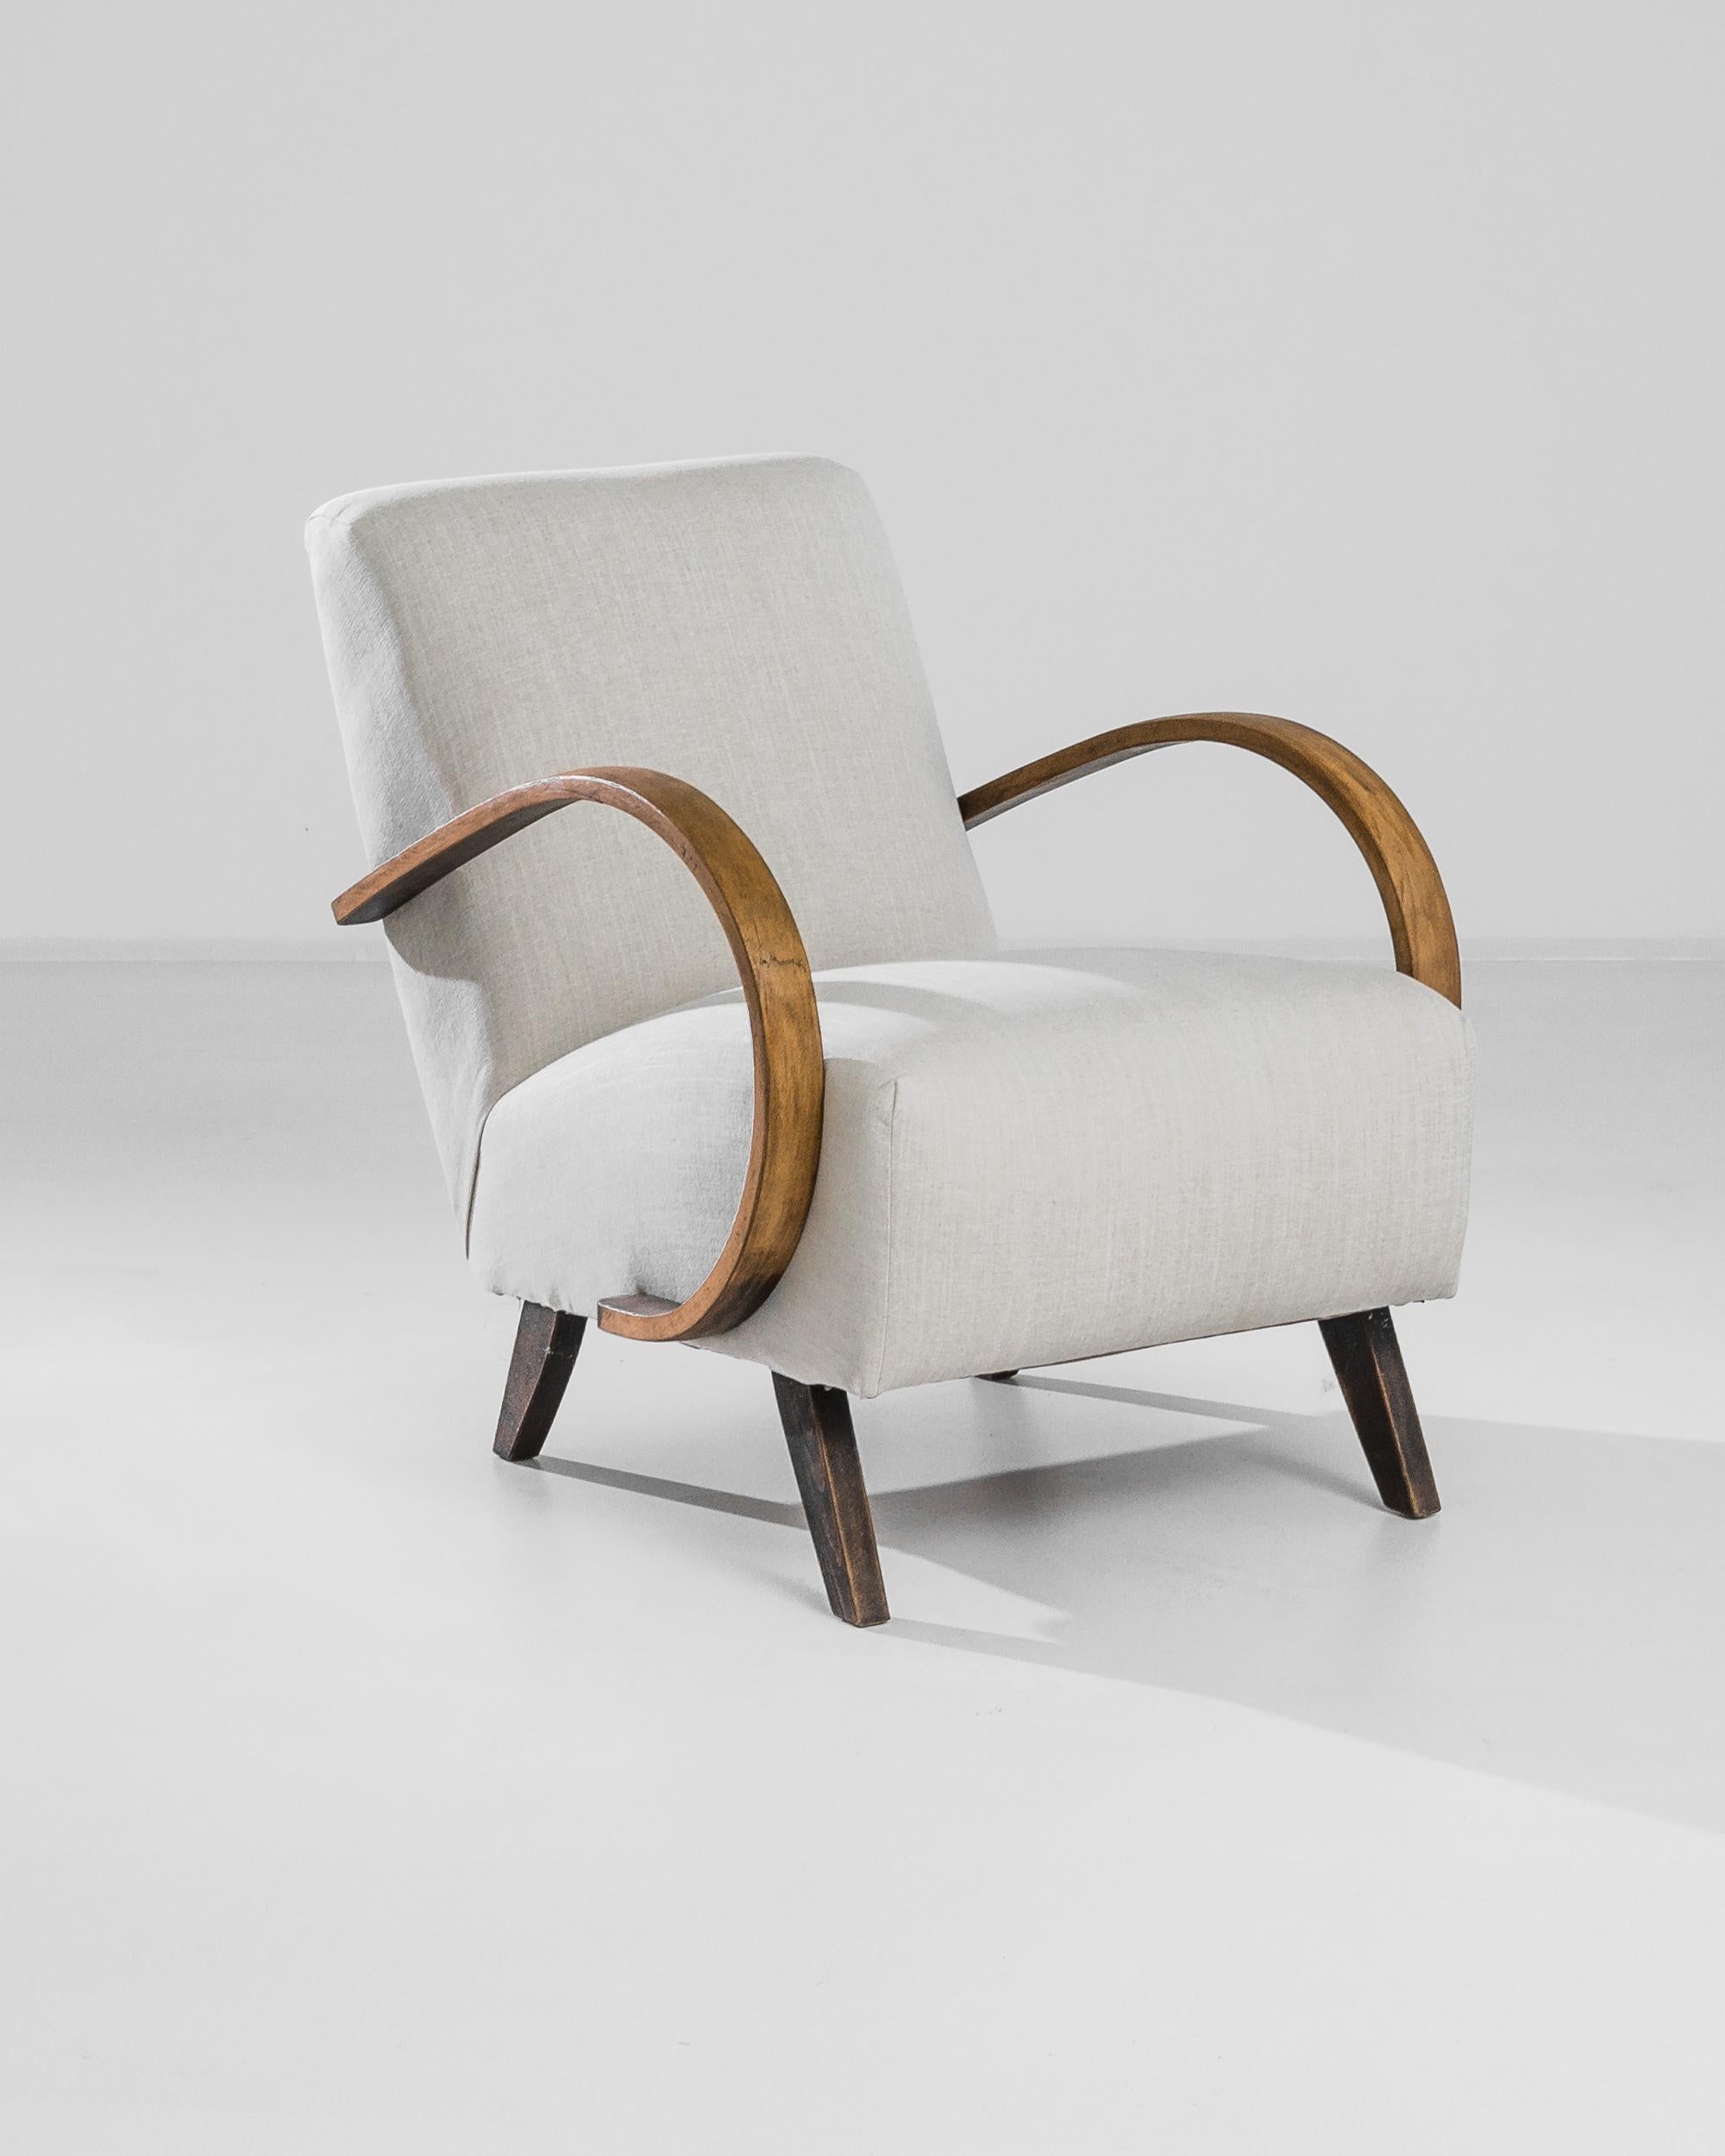 Timeless comfort meets Modernist sophistication in this iconic design by Czech furniture designer J. Halabala. Produced in the 1950s, this wooden armchair flaunts an anatomy constituted by contrast: the sweeping curve of the bentwood armrest is